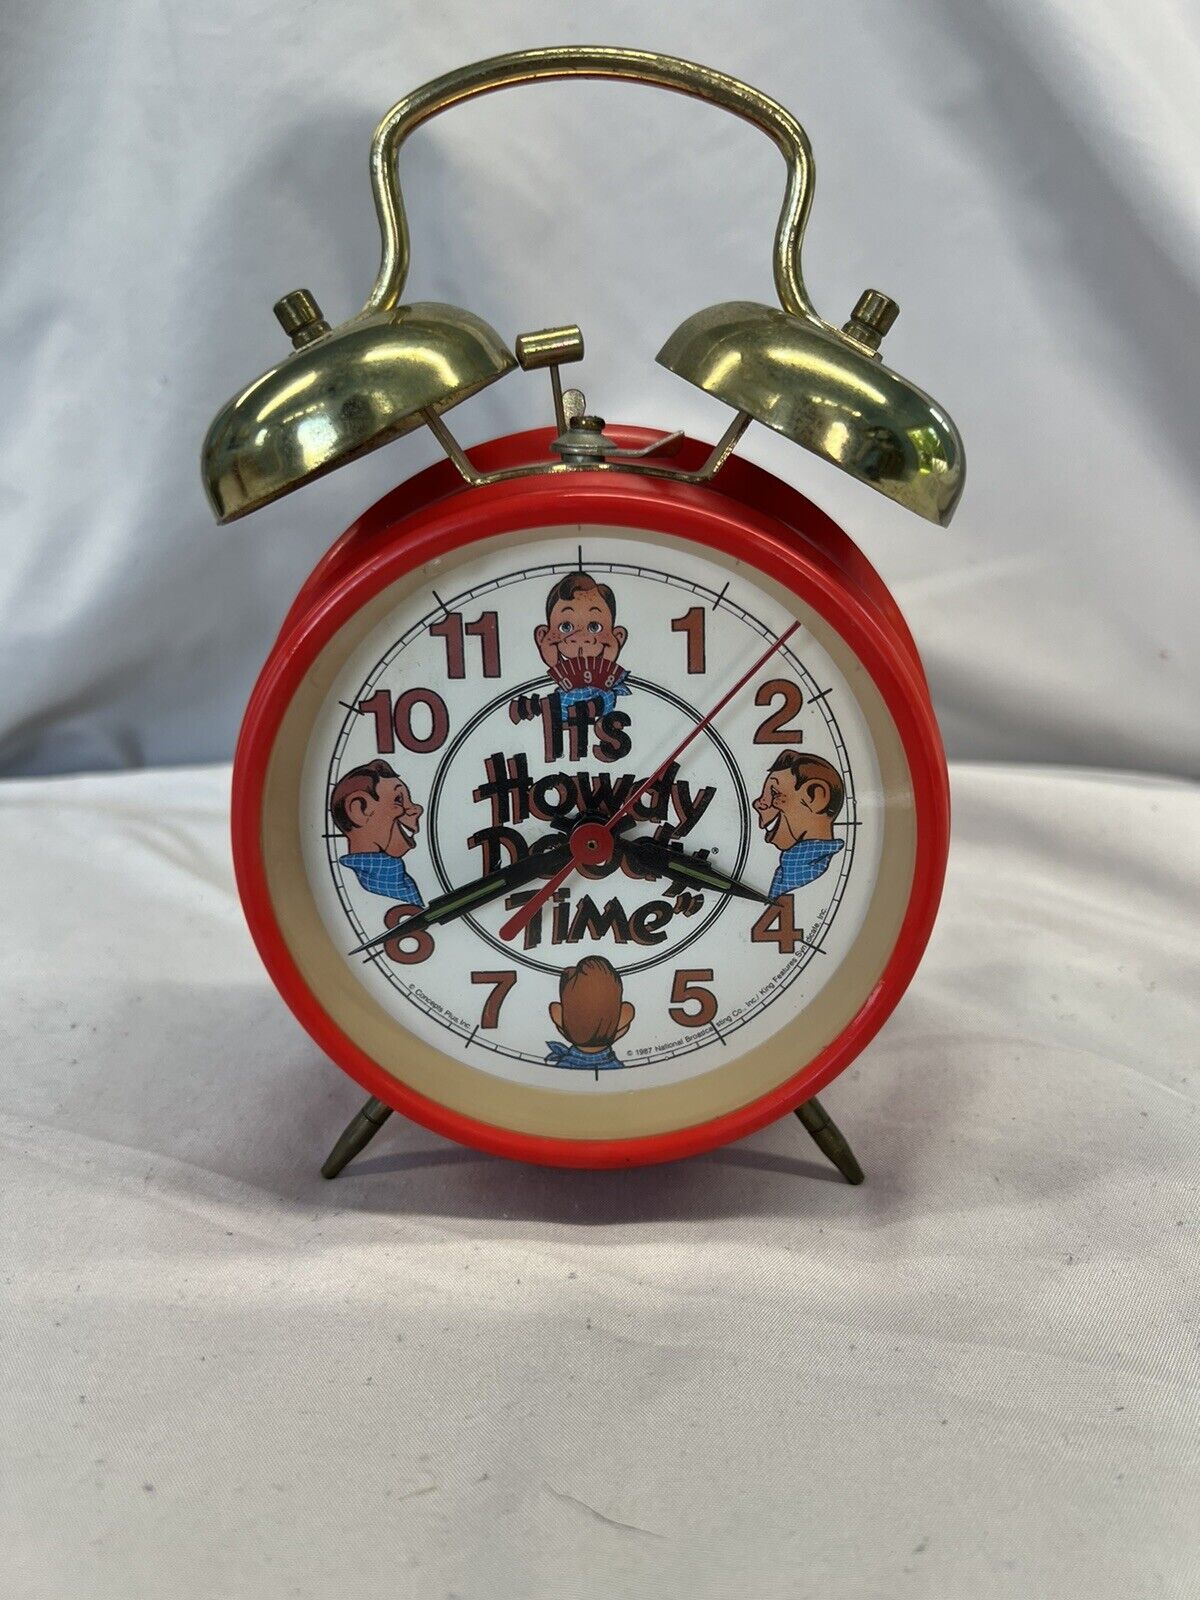 Rare Vintage 1987 It\'s Howdy Doody Time alarm clock Works Great